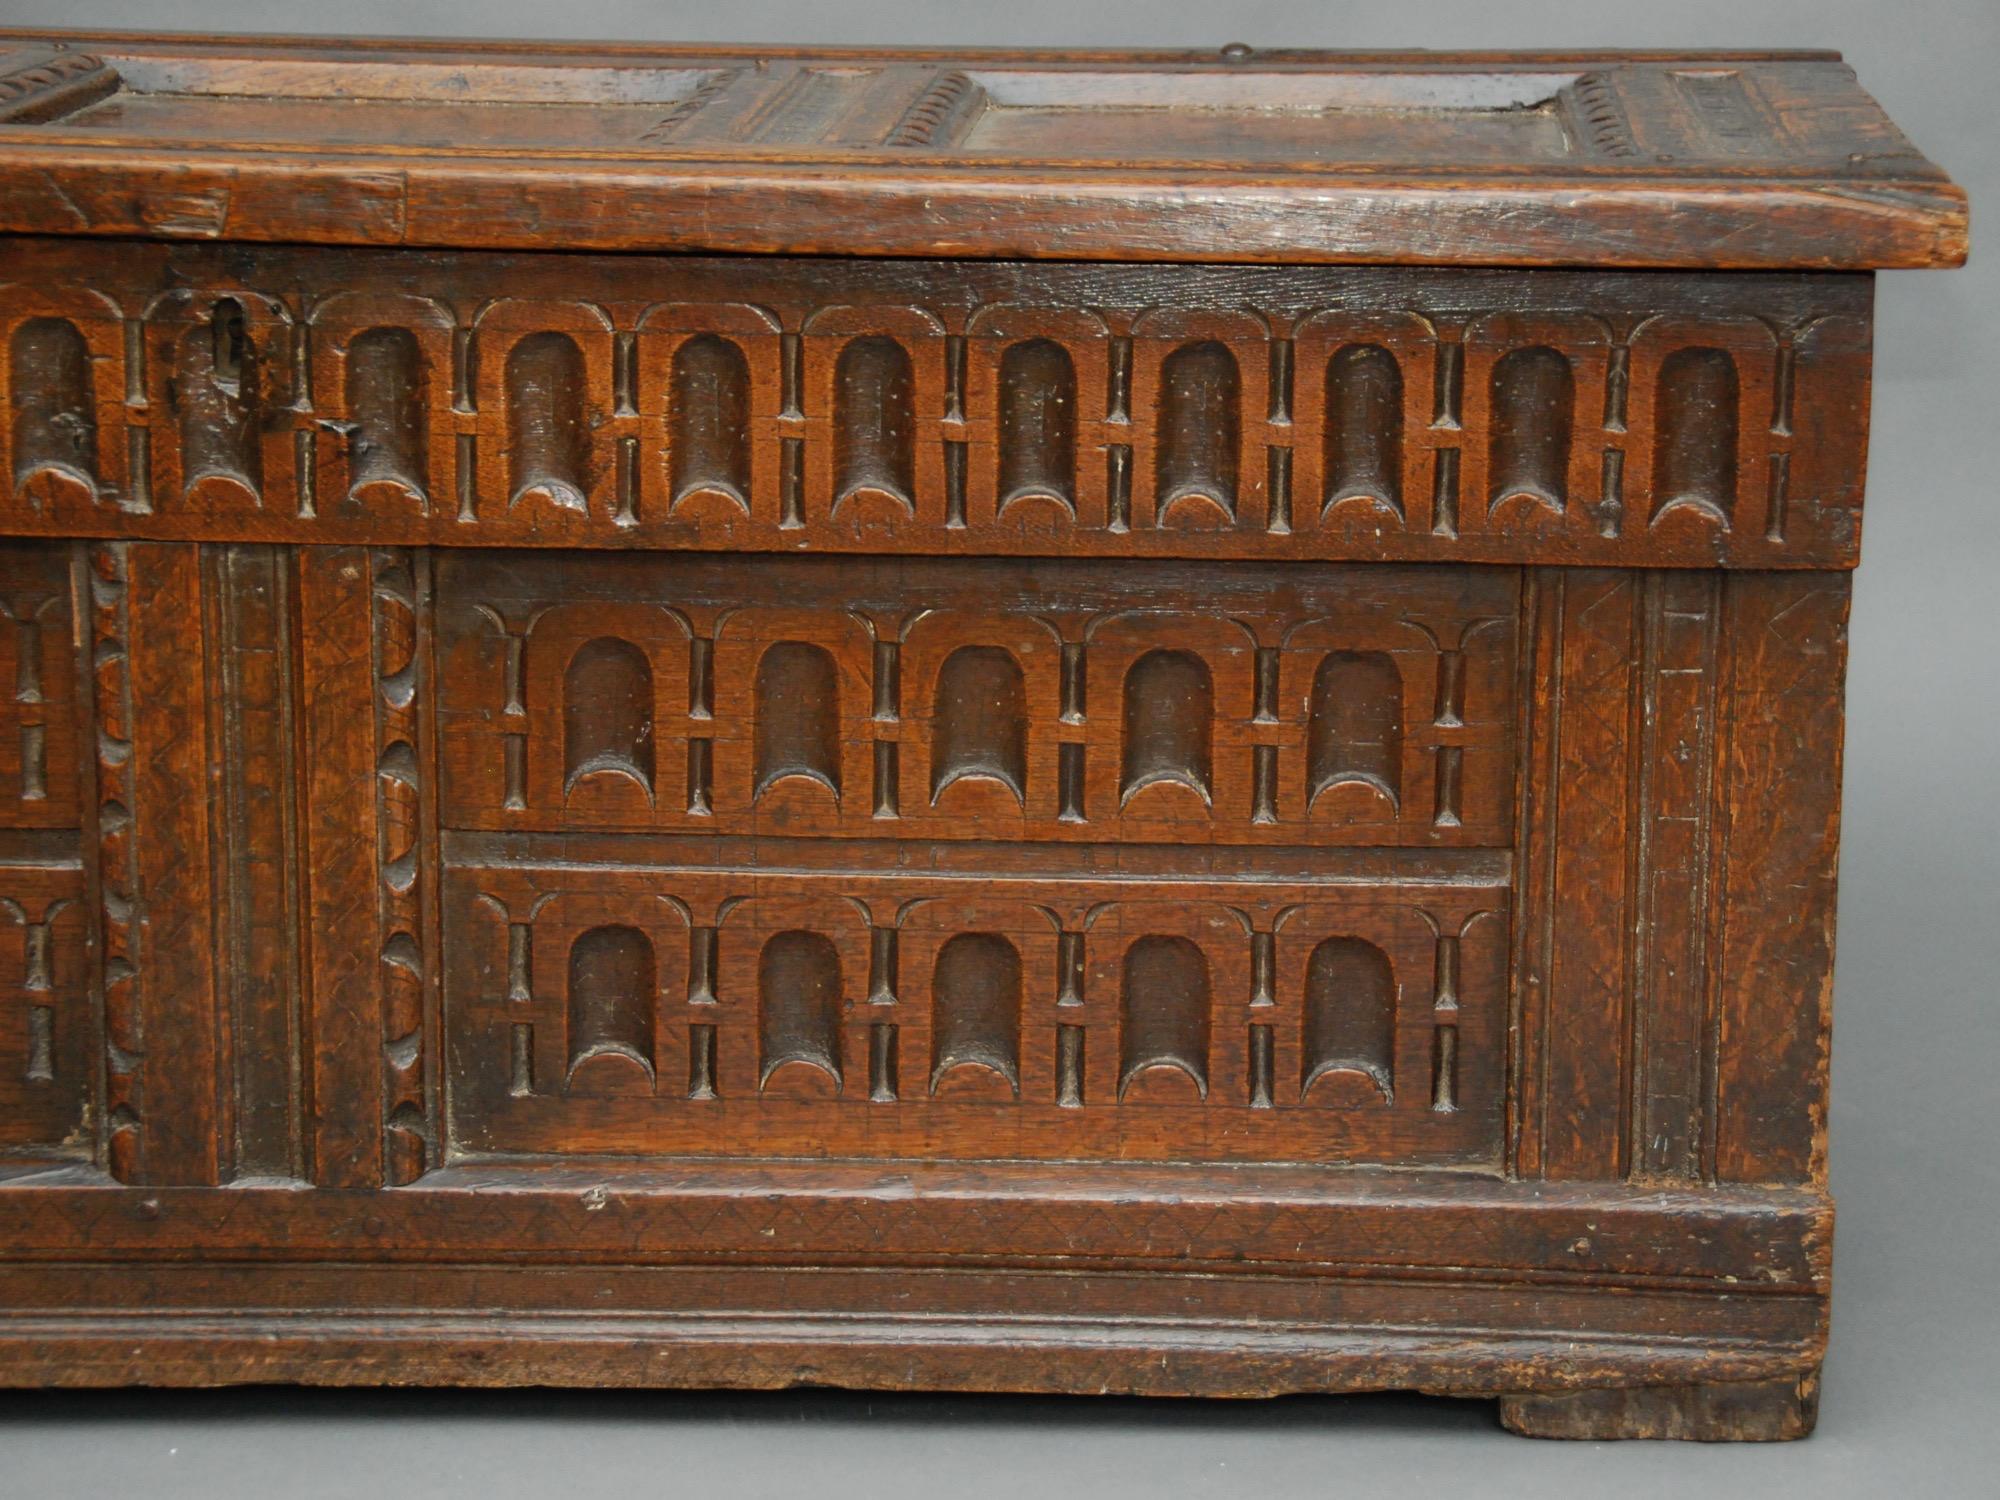 A 17th century oak chest with a triple paneled top having incised lozenges and the interior with remains of a shelf, the frieze and twin paneled front with arcaded carvings. This has a gorgeous patina!